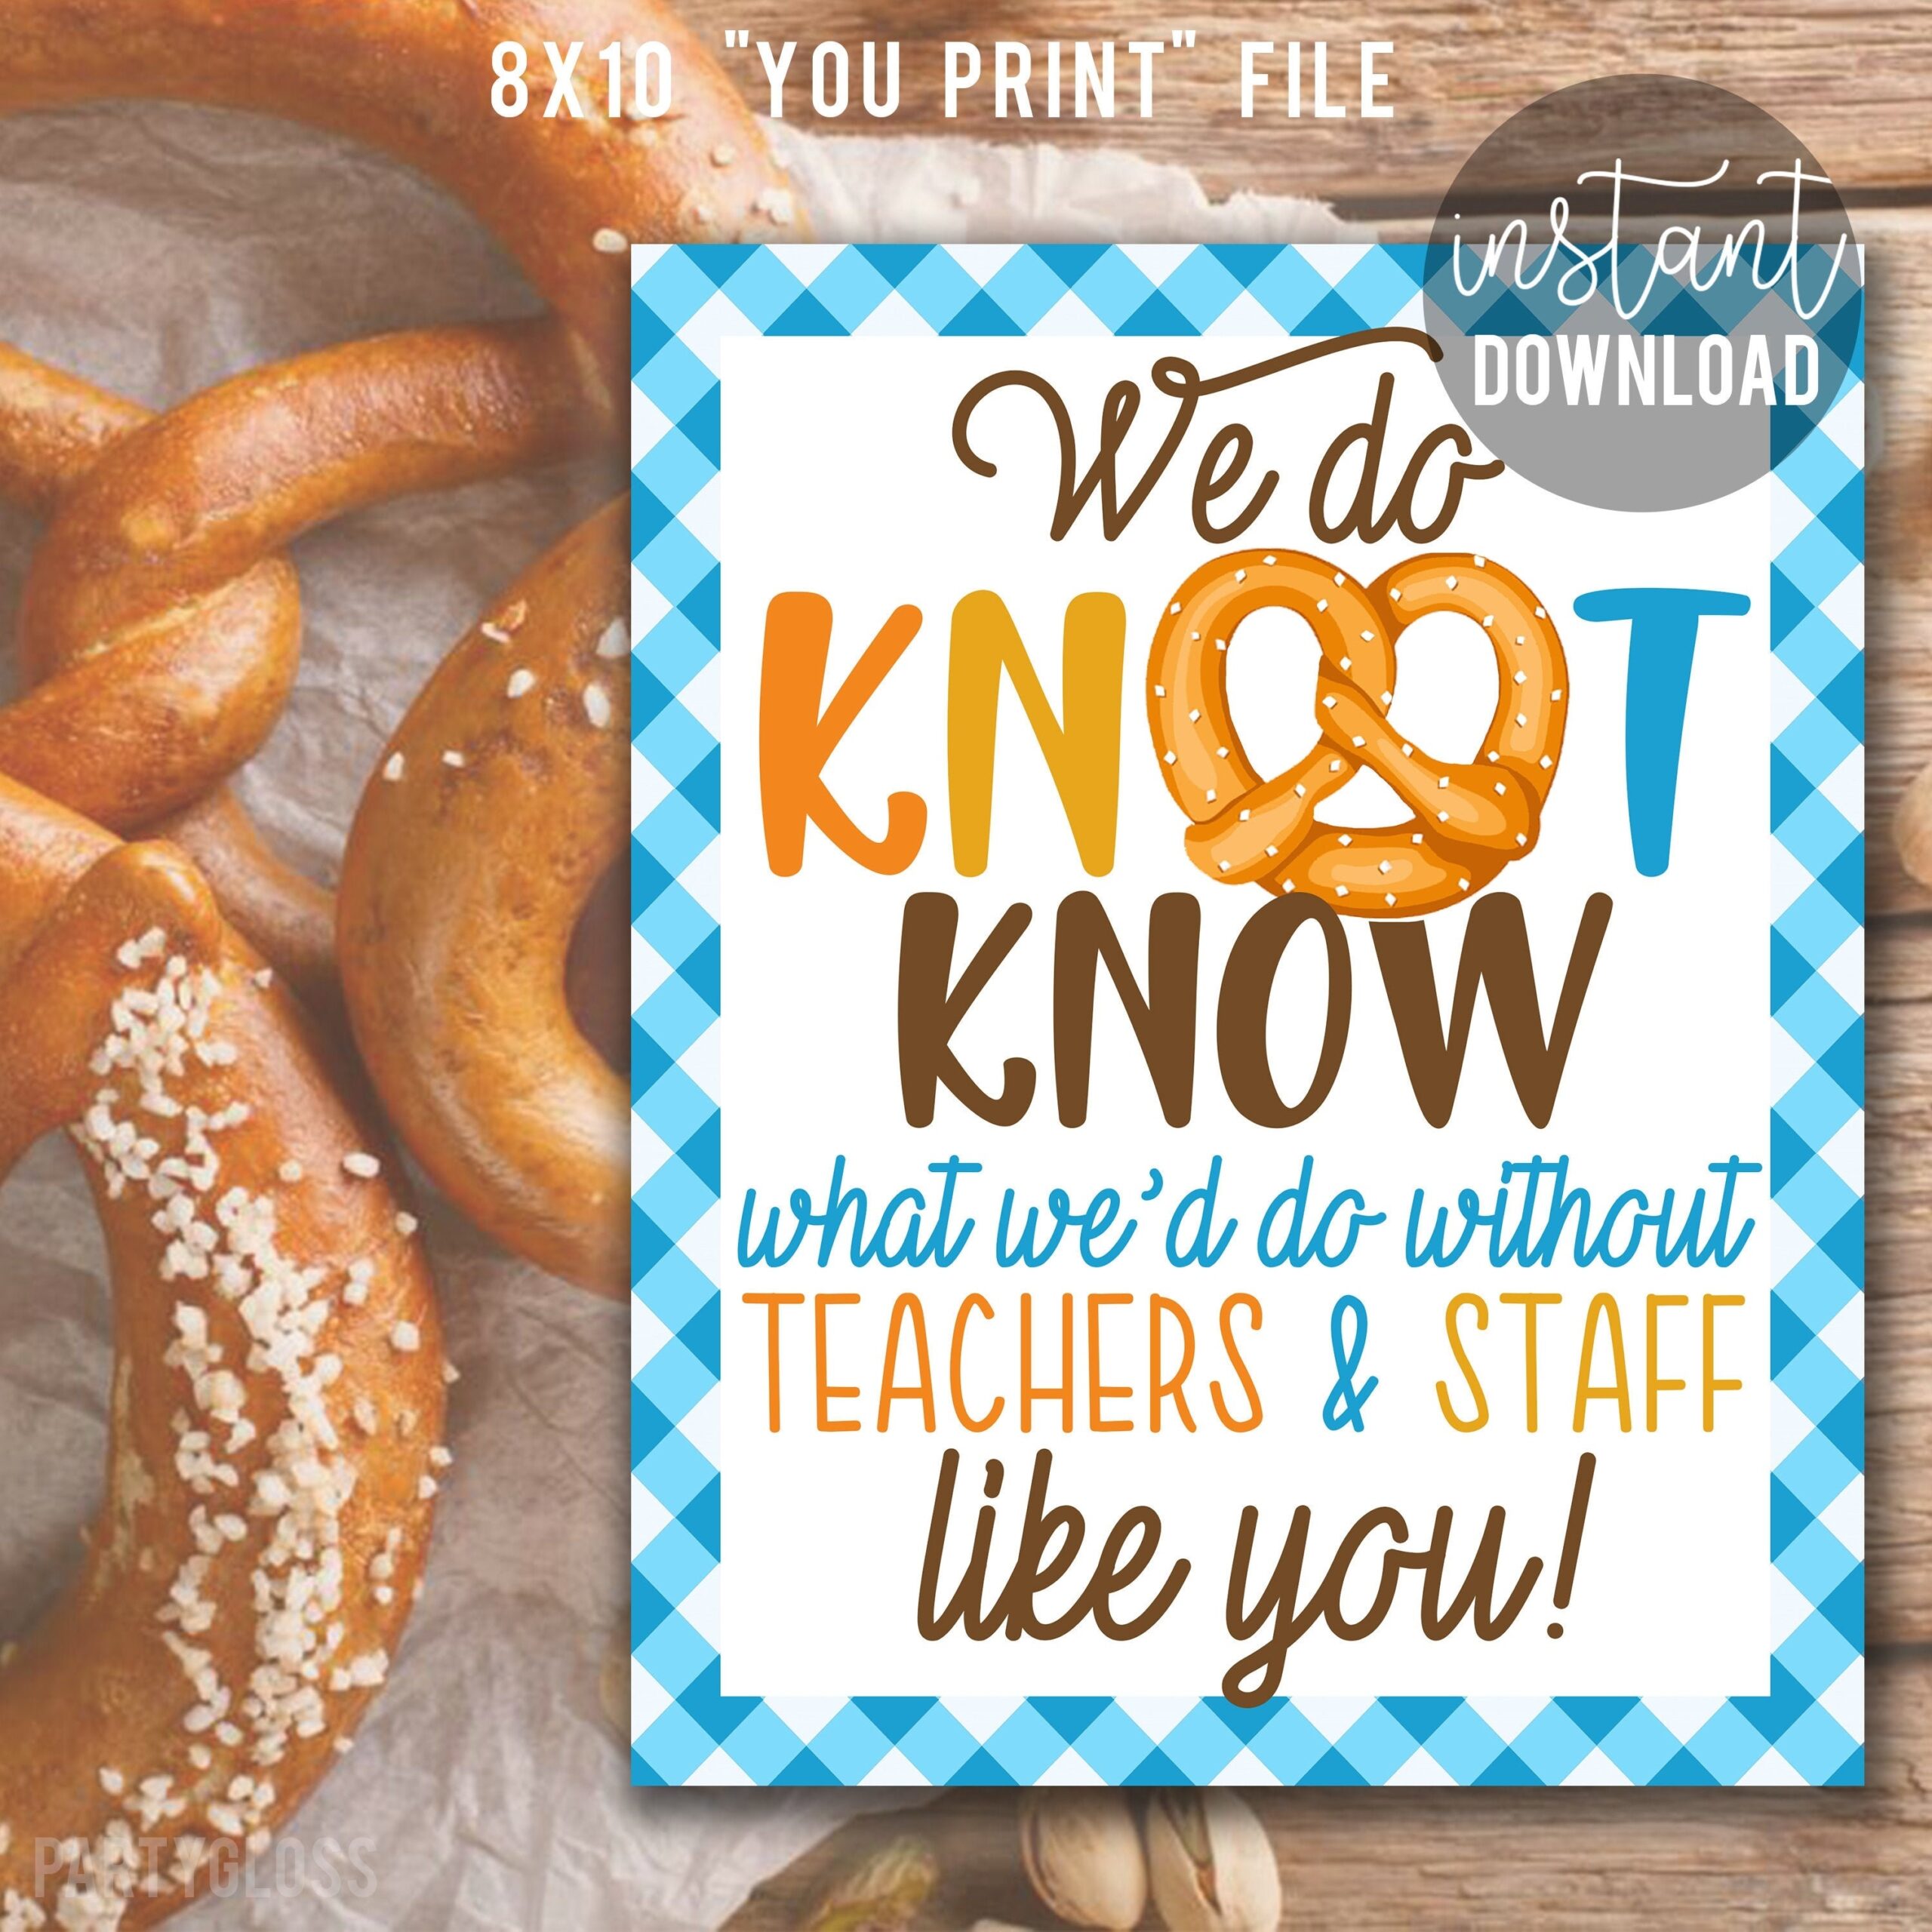 Pretzel We Do Knot Know What We d Do Without Teachers And Staff Like You Appreciation 8x10 Print Sign Pretzels Teacher Week PTO PTA Office Etsy